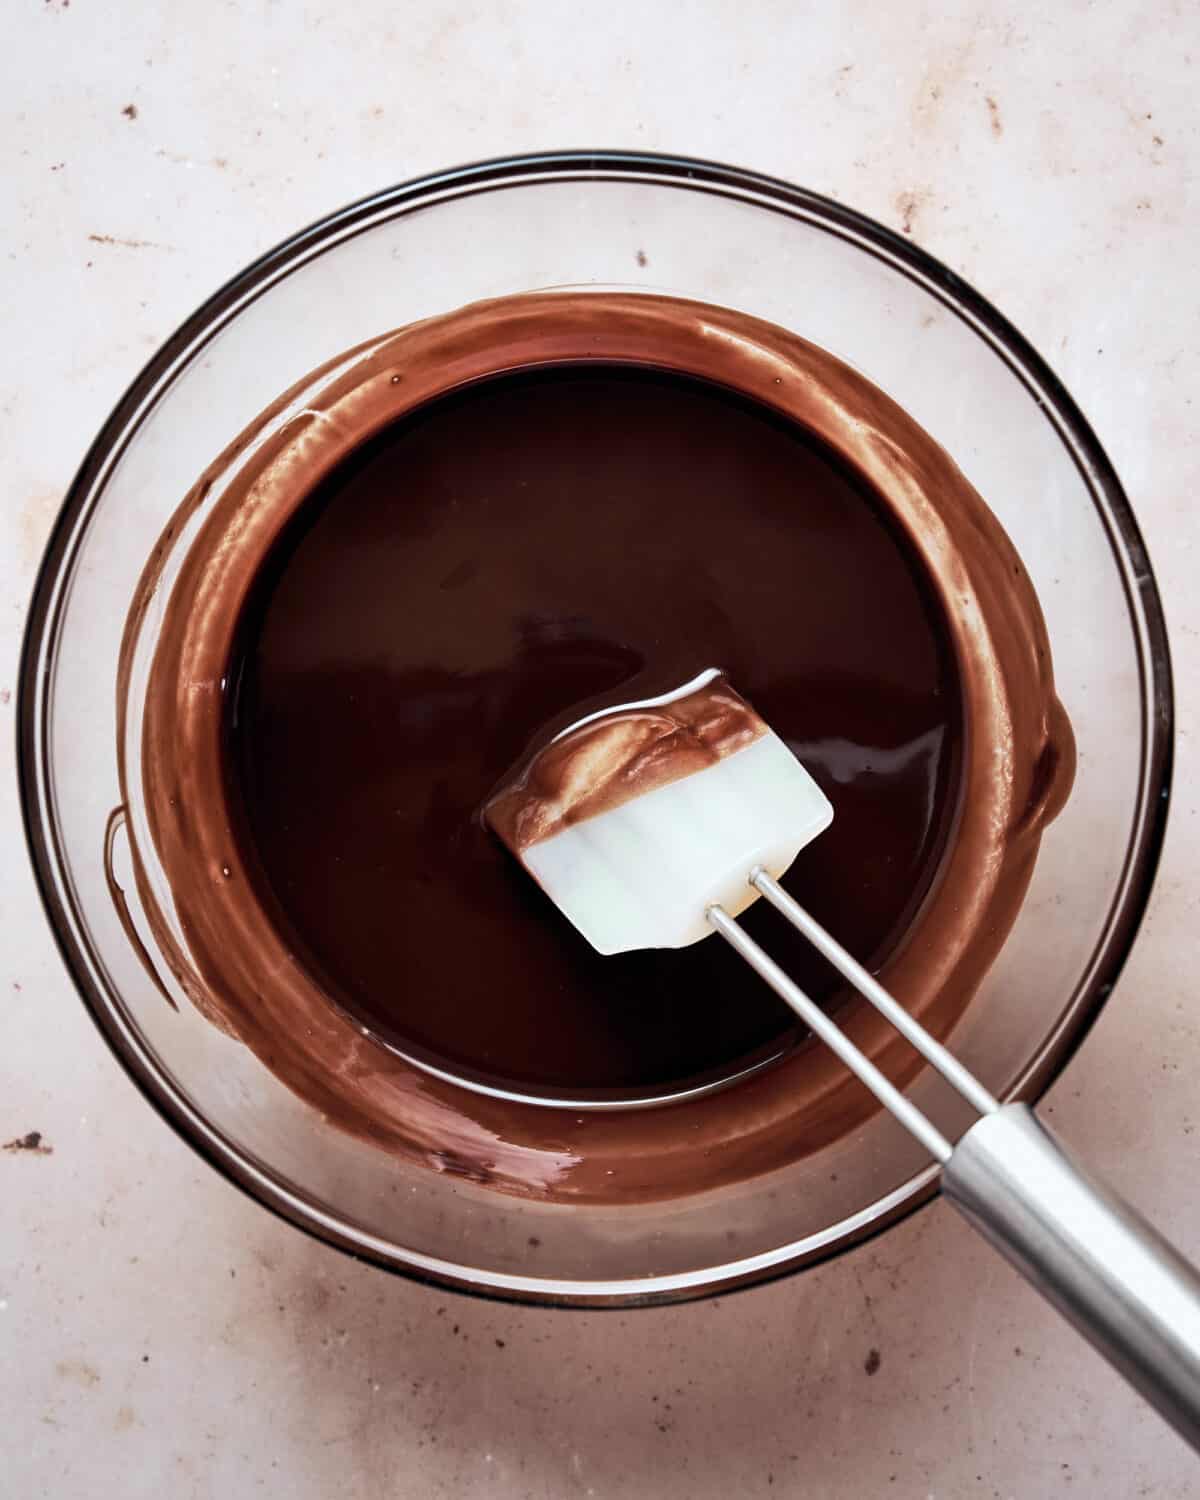 Melted chocolate and butter in a bowl.